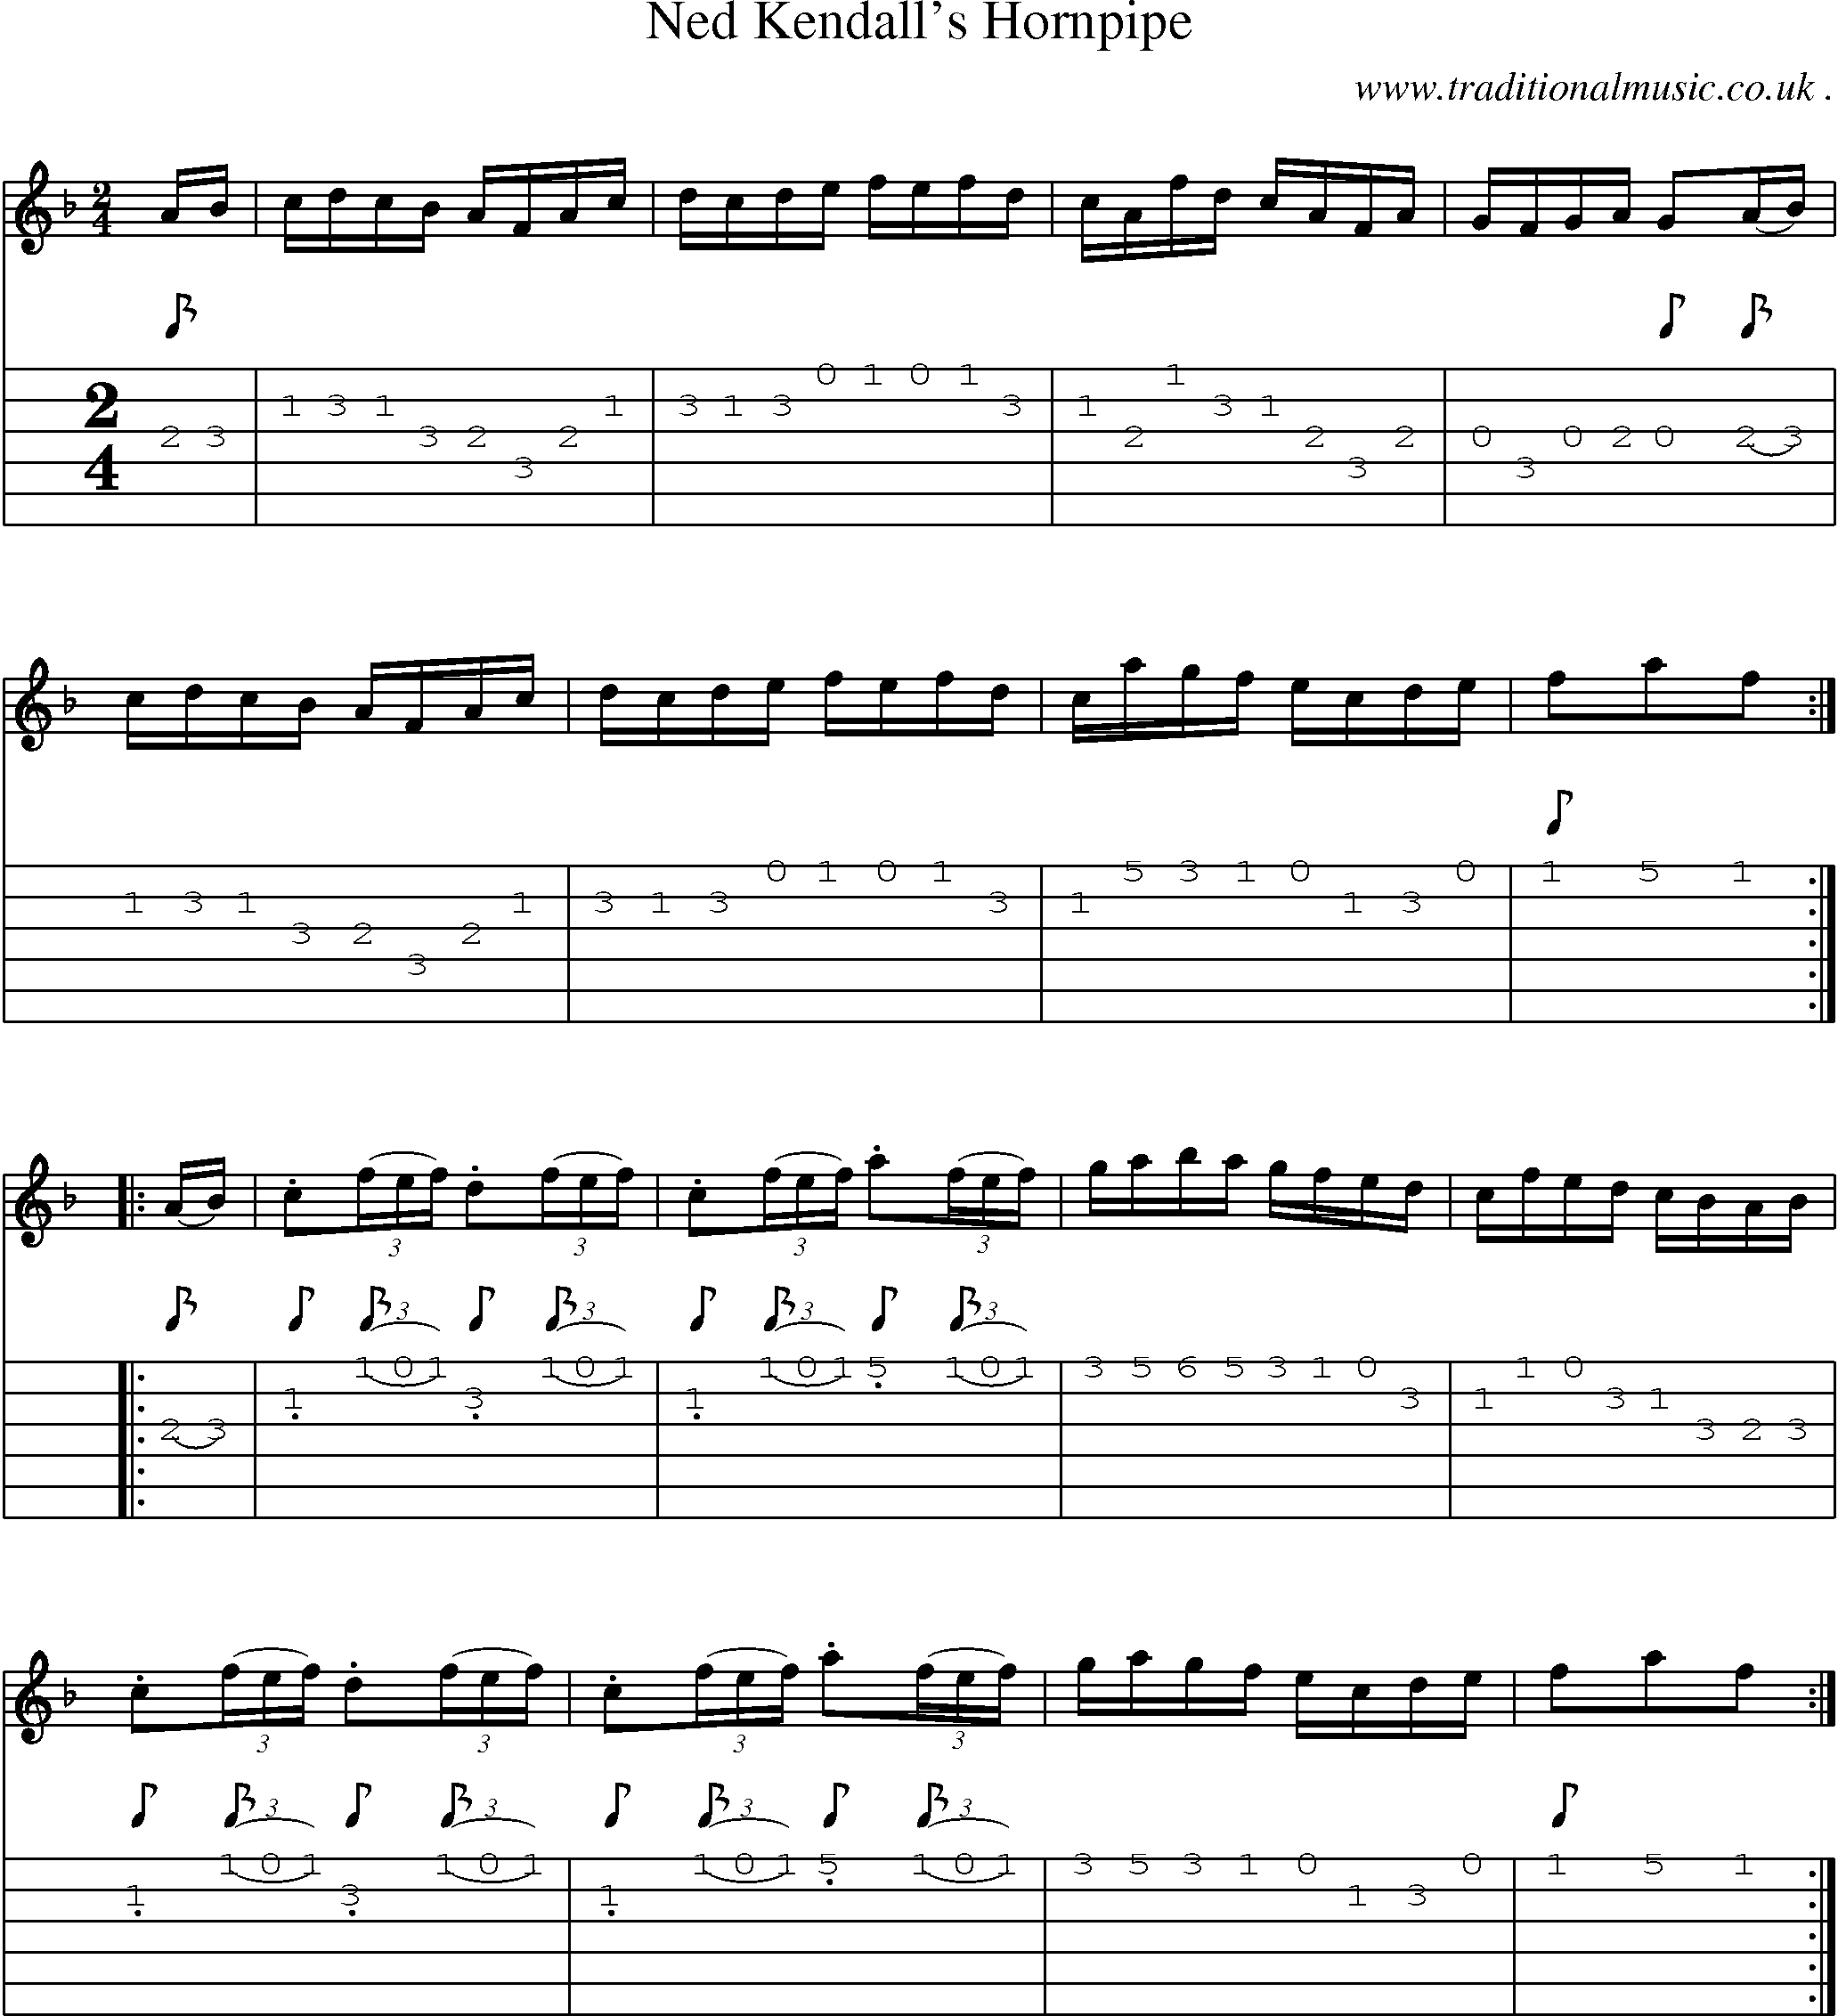 Sheet-Music and Guitar Tabs for Ned Kendalls Hornpipe